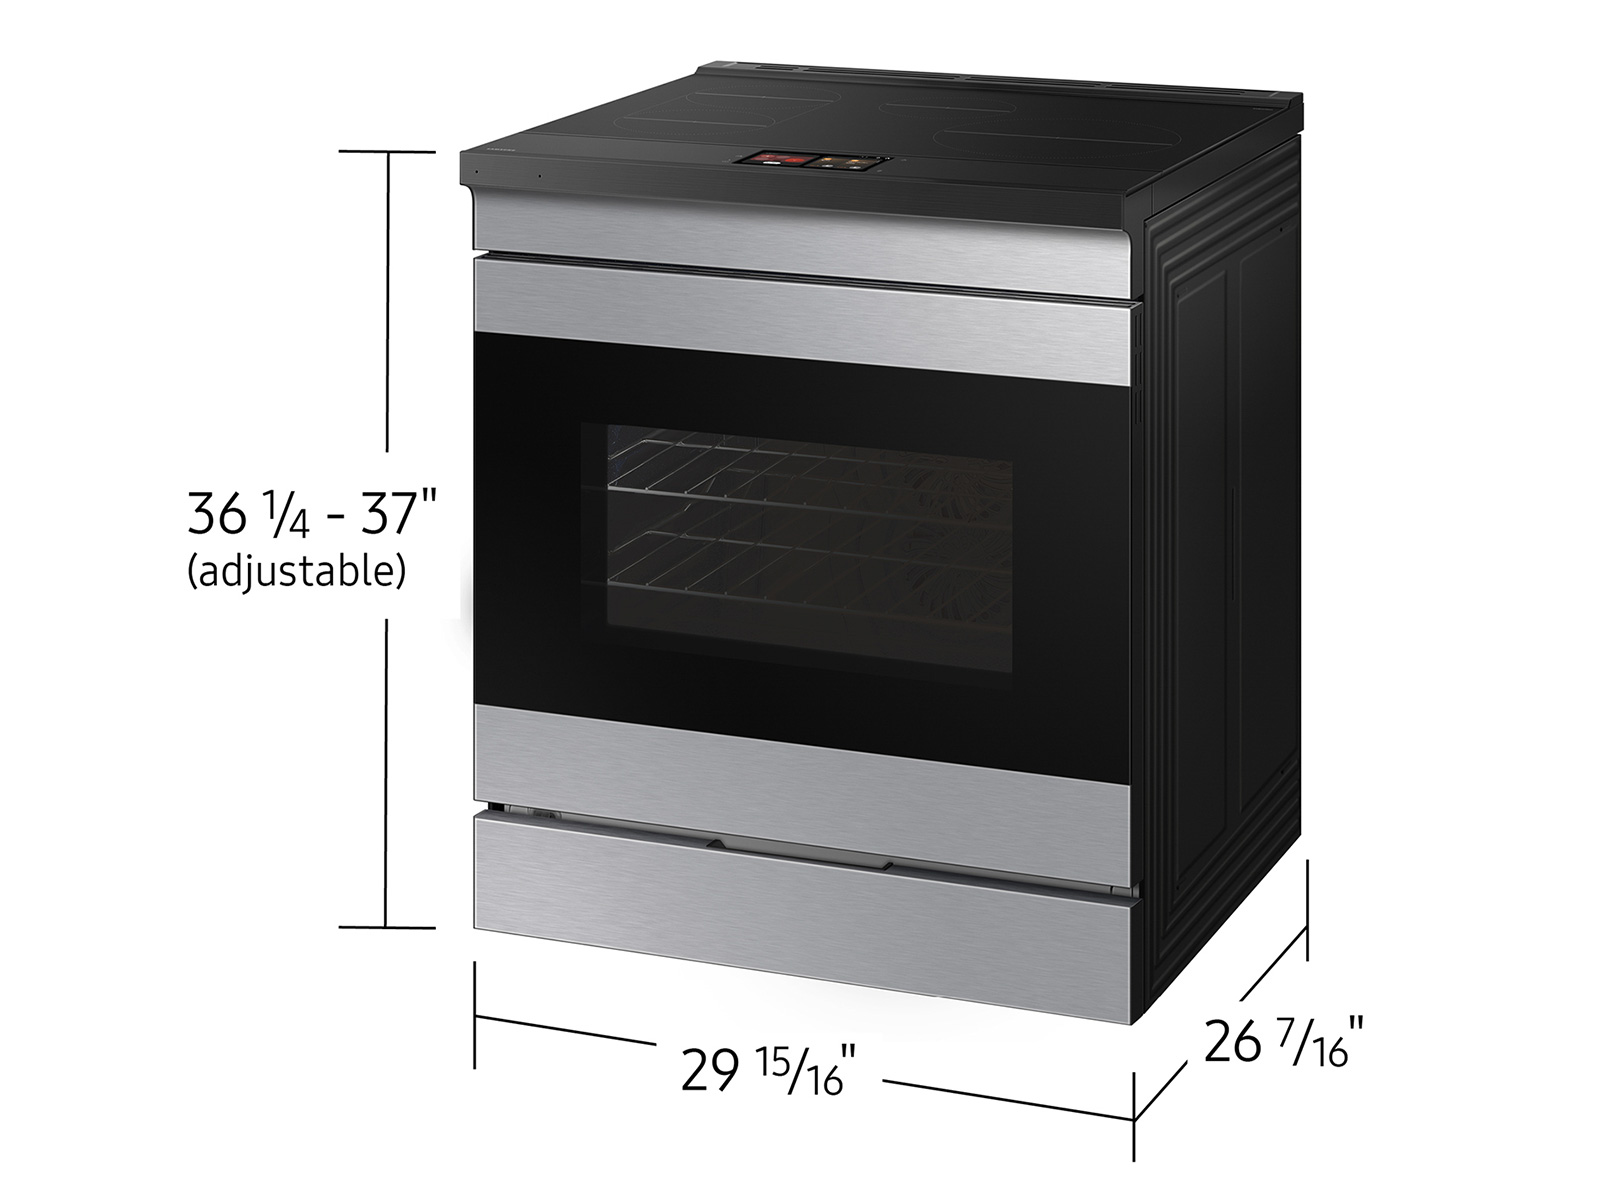 Thumbnail image of Bespoke 6.3 cu. ft. Smart Slide-In Induction Range with AI Home &amp; Smart Oven Camera in Stainless Steel